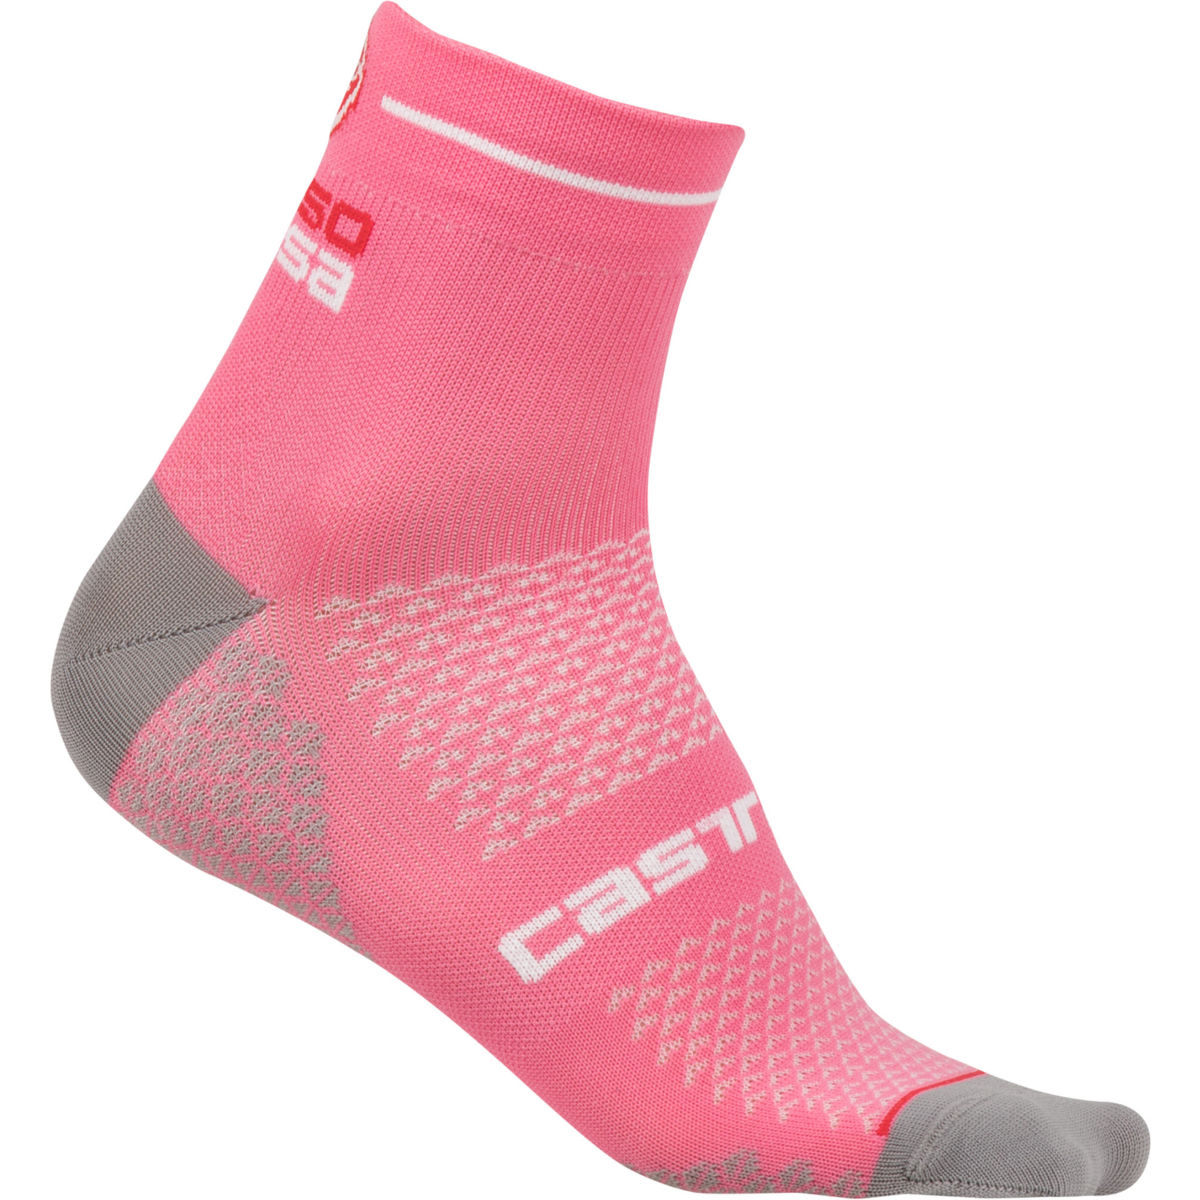 Calcetines Castelli Rosa Corsa 2 para mujer - Calcetines